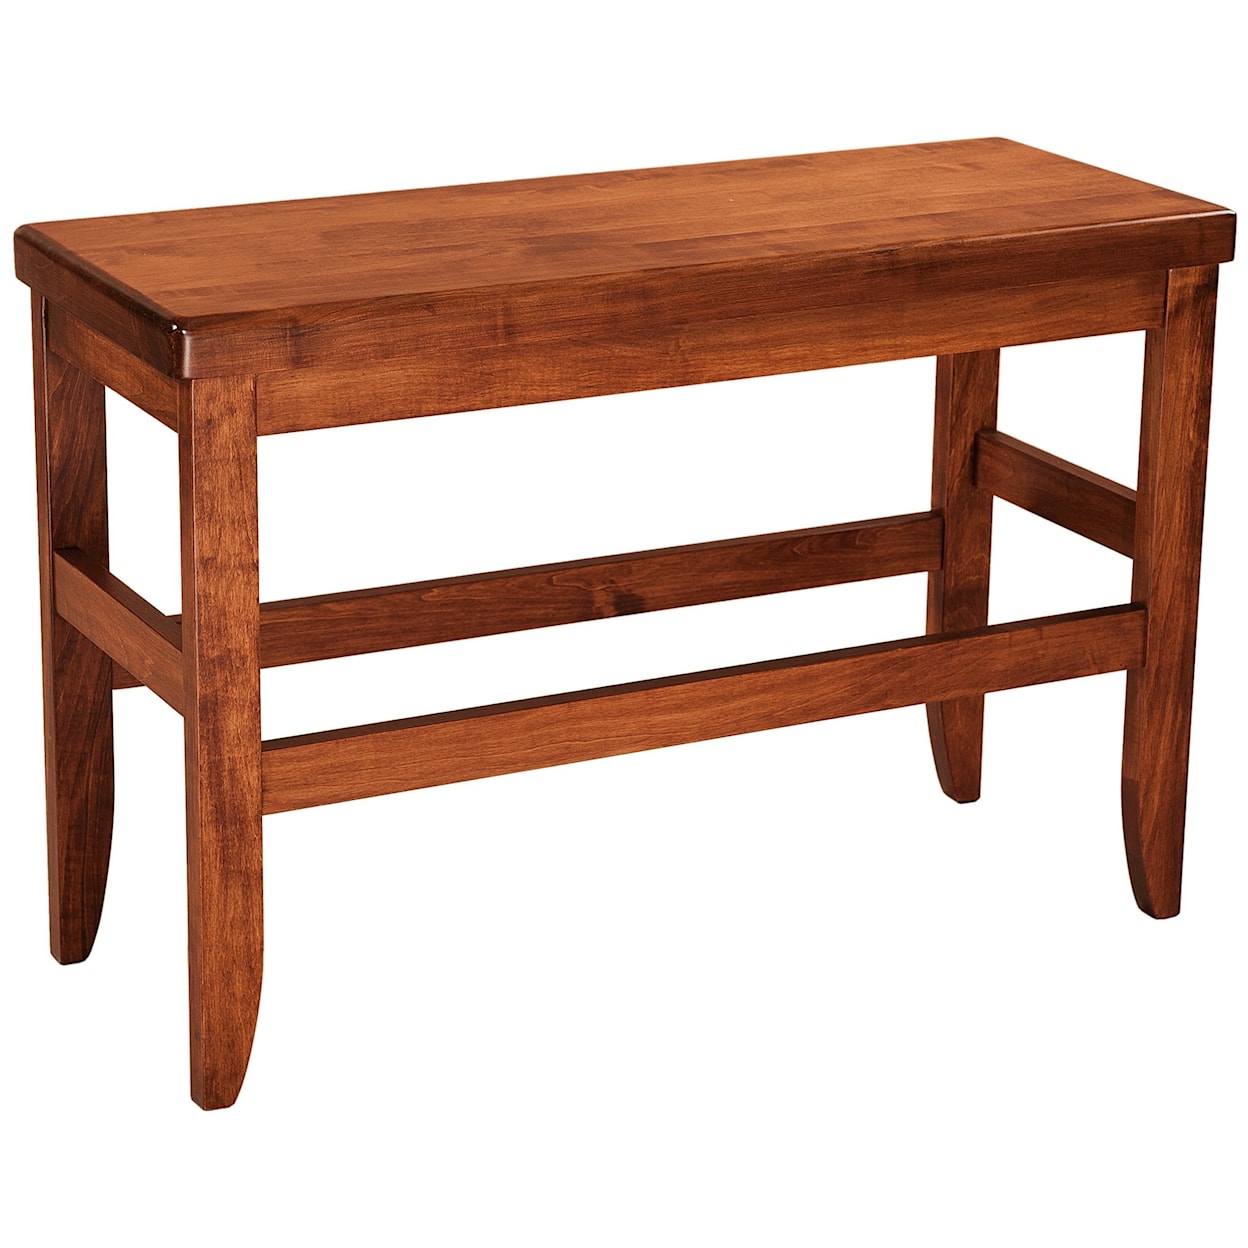 F&N Woodworking Clifton Bench 24"h x 36"w - Wood Seat